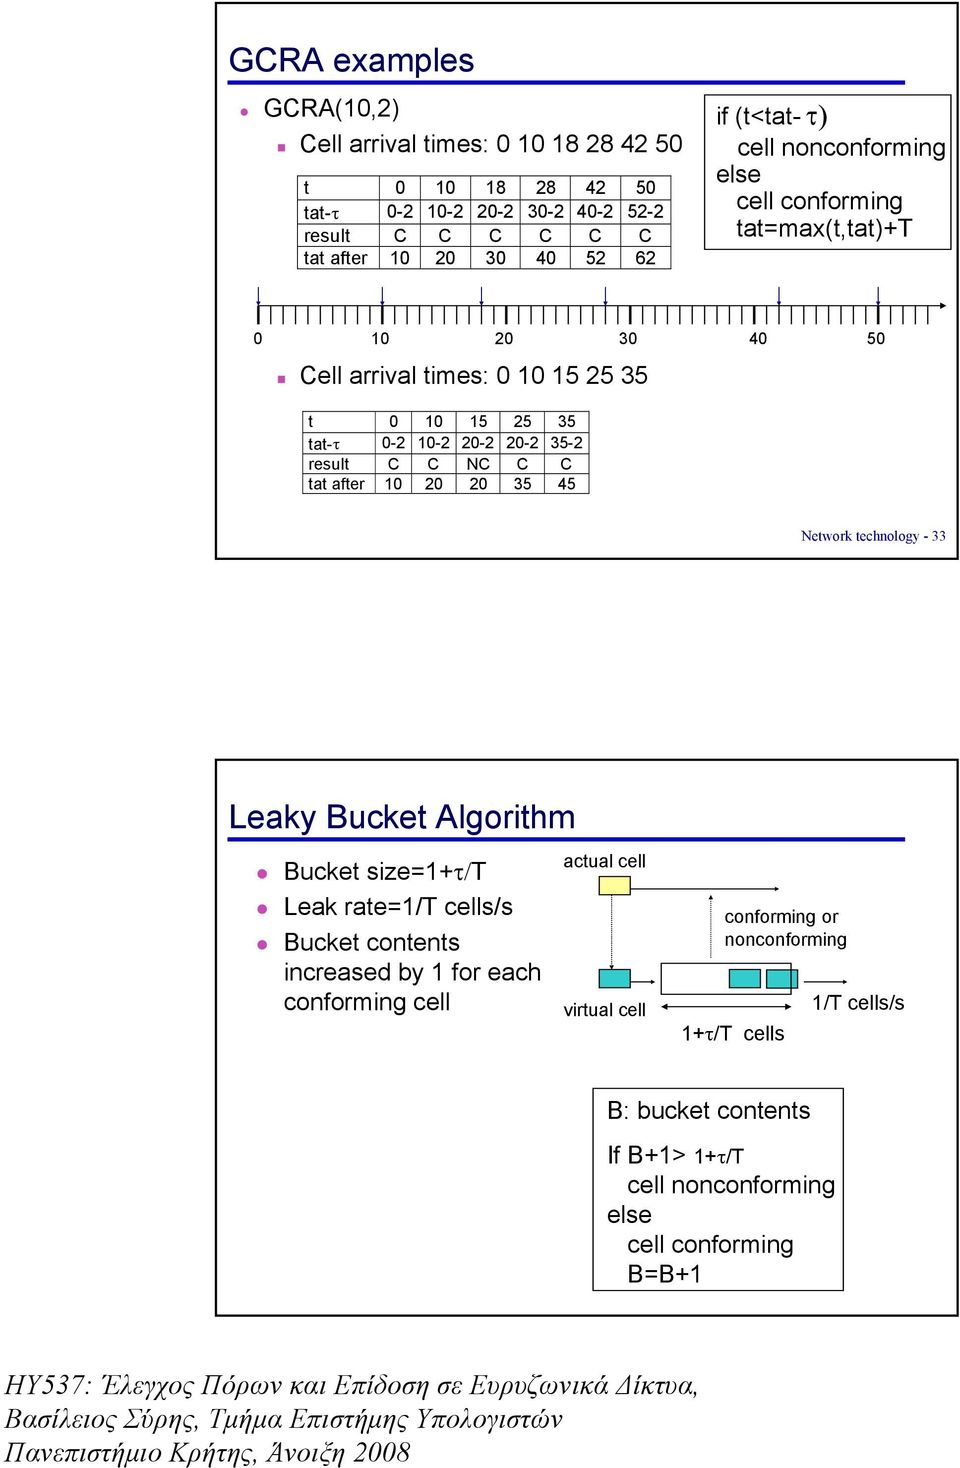 C tat after 10 20 20 35 45 Network technology - 33 Leaky Bucket Algorithm Bucket size=1+τ/t Leak rate=1/t cells/s Bucket contents increased by 1 for each conforming cell